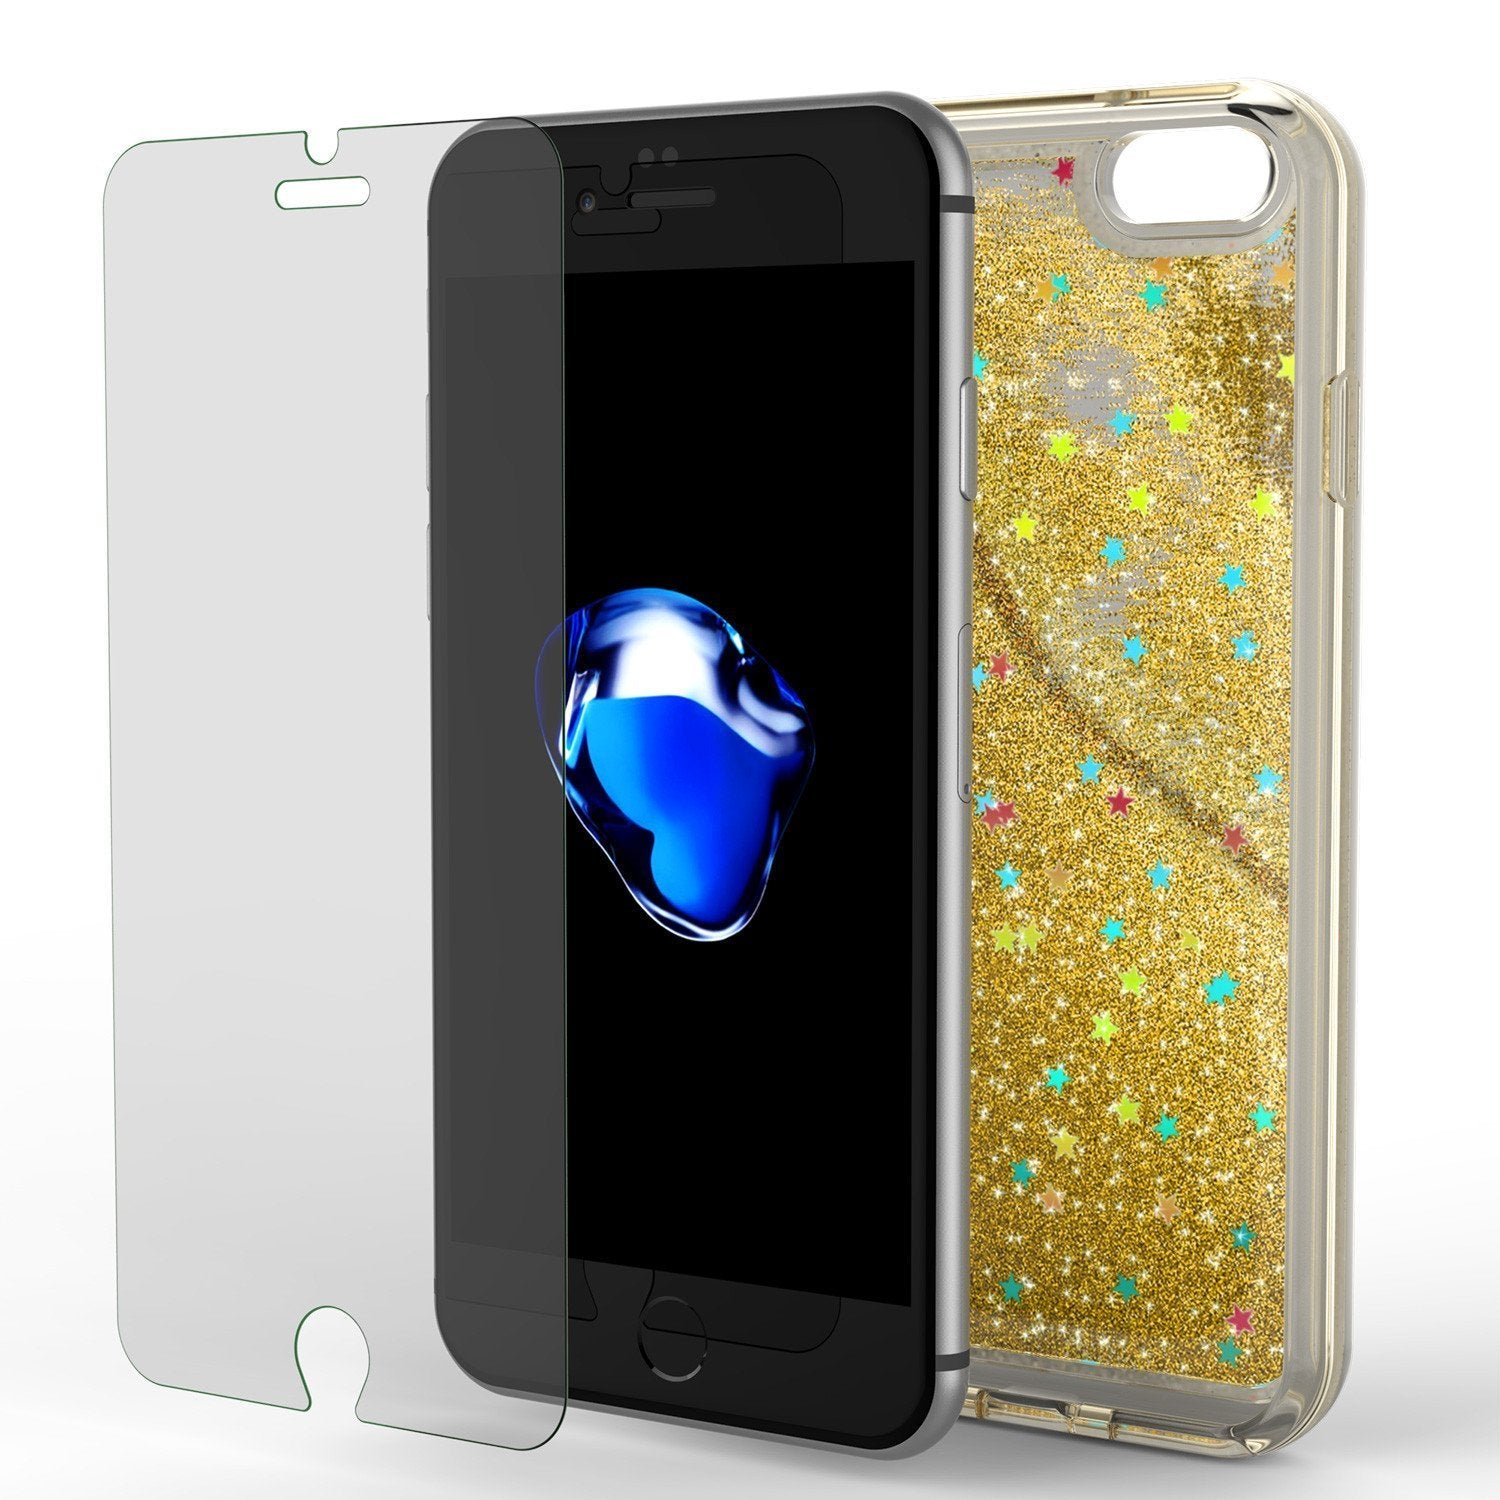 iPhone SE (4.7") Case, PunkCase LIQUID Gold Series, Protective Dual Layer Floating Glitter Cover